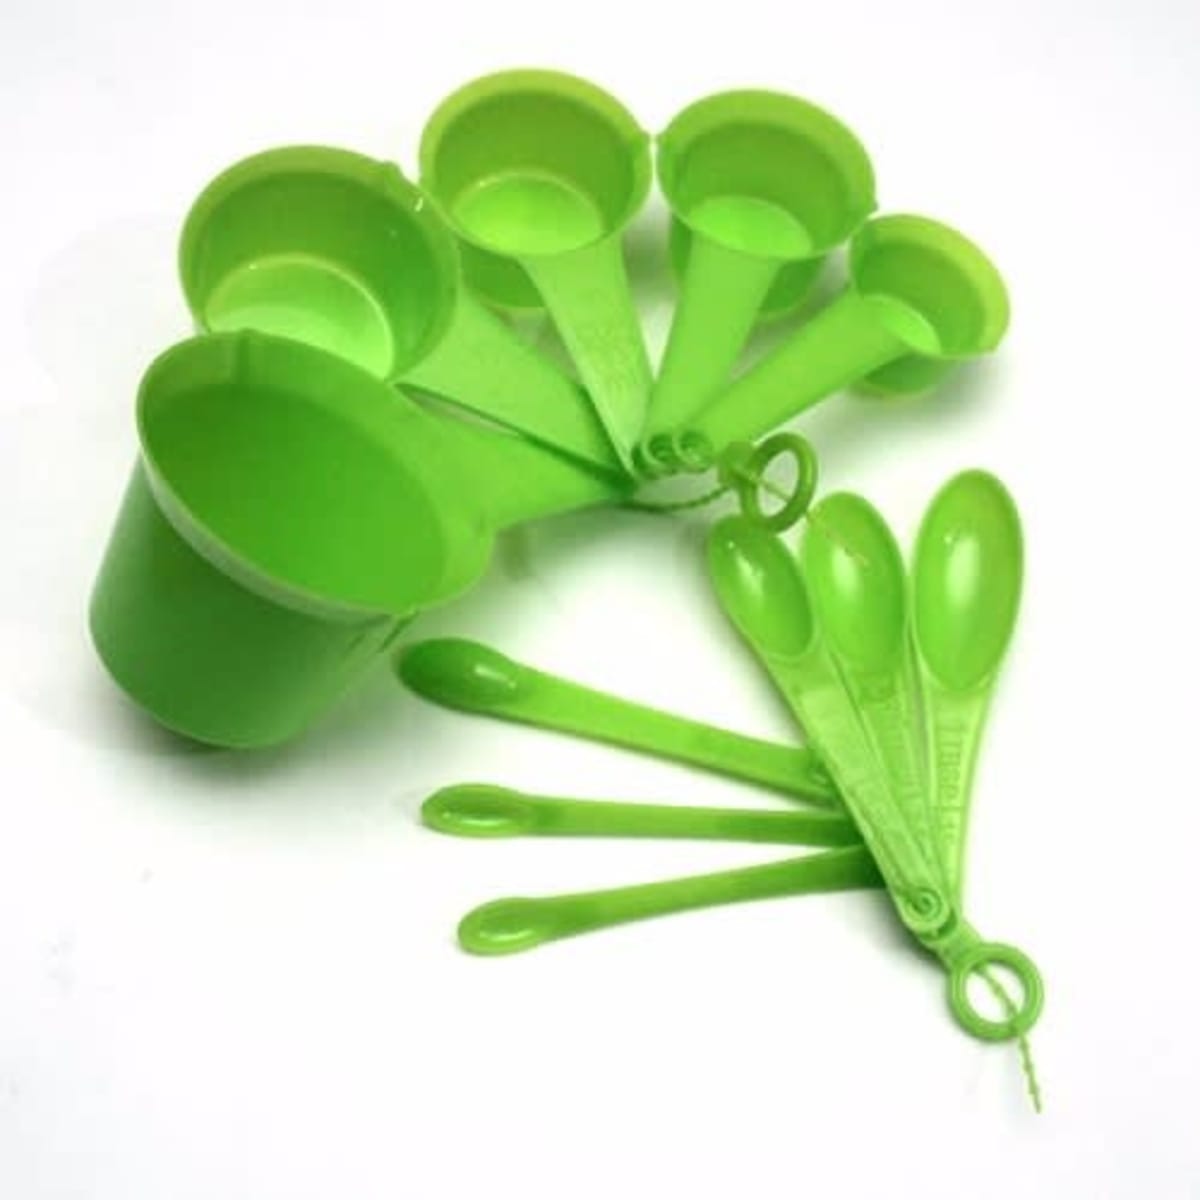 Green on Black Measuring Cups and Spoons Set